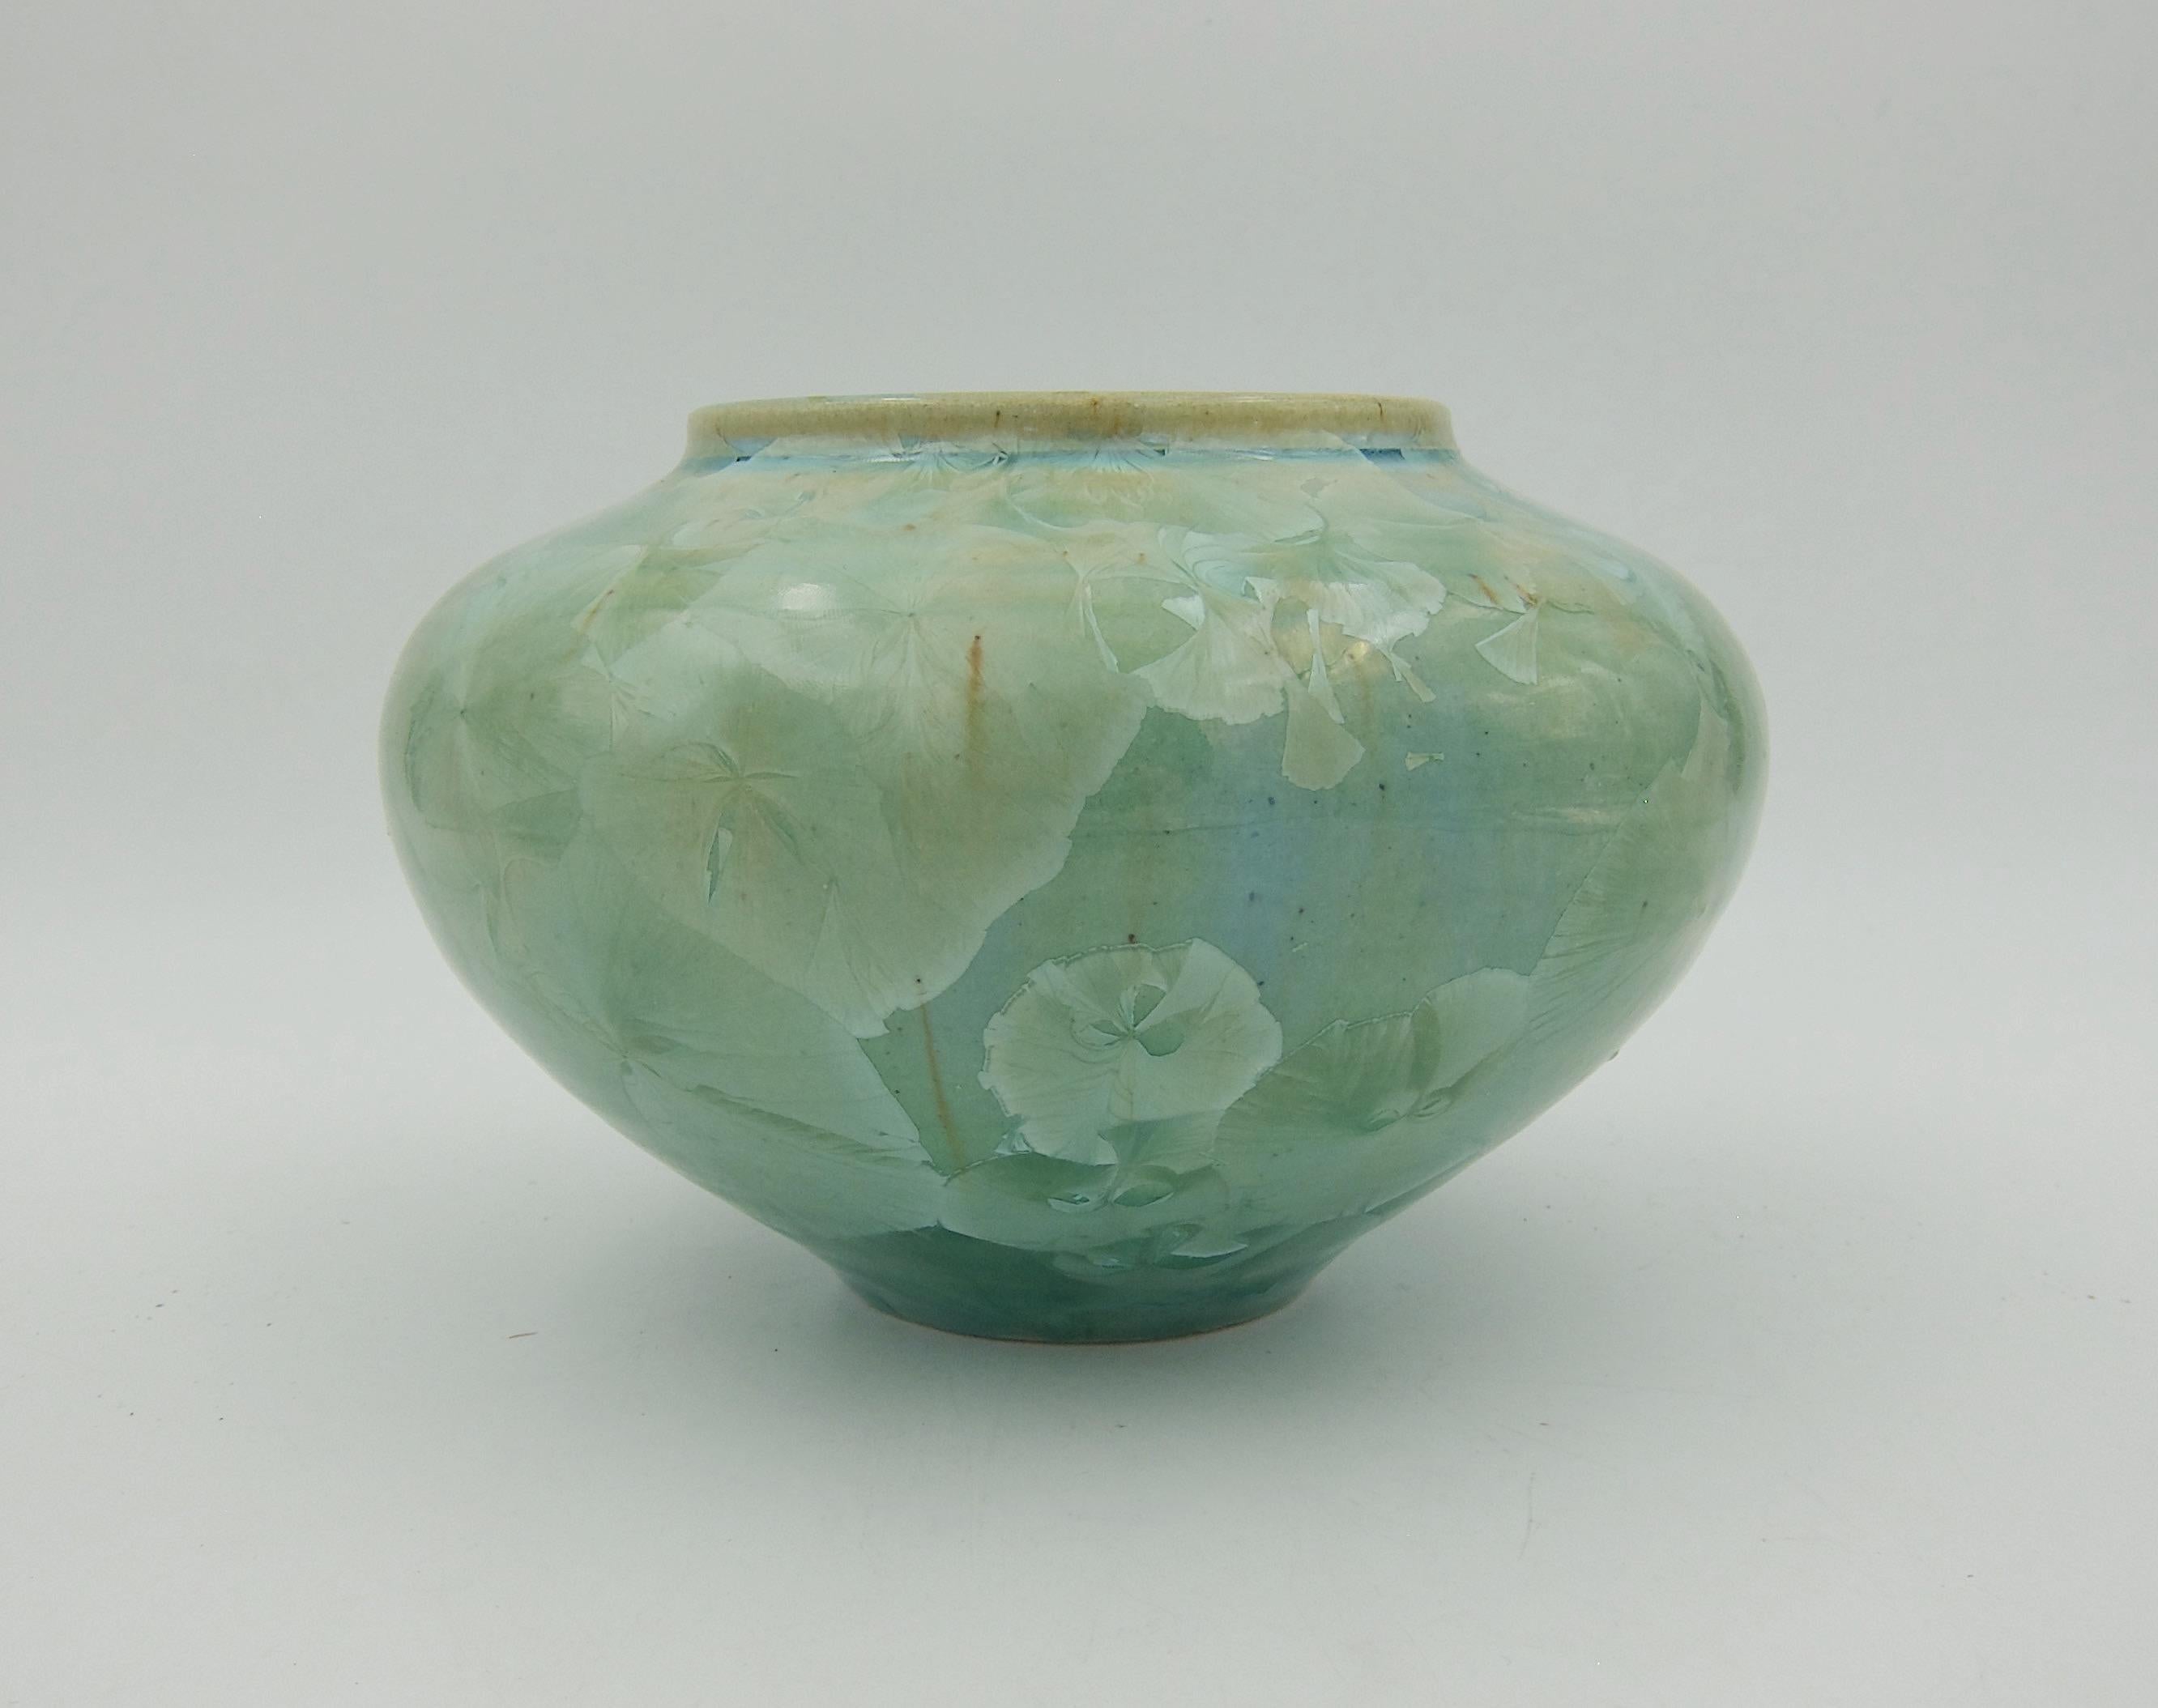 A hand-thrown and signed vintage studio pottery vase from 1994 with a sophisticated crystalline glaze in shades of glossy celadon green with large, overlapping icy crystalline clusters and accents of tan and brown. The American potter is Bill